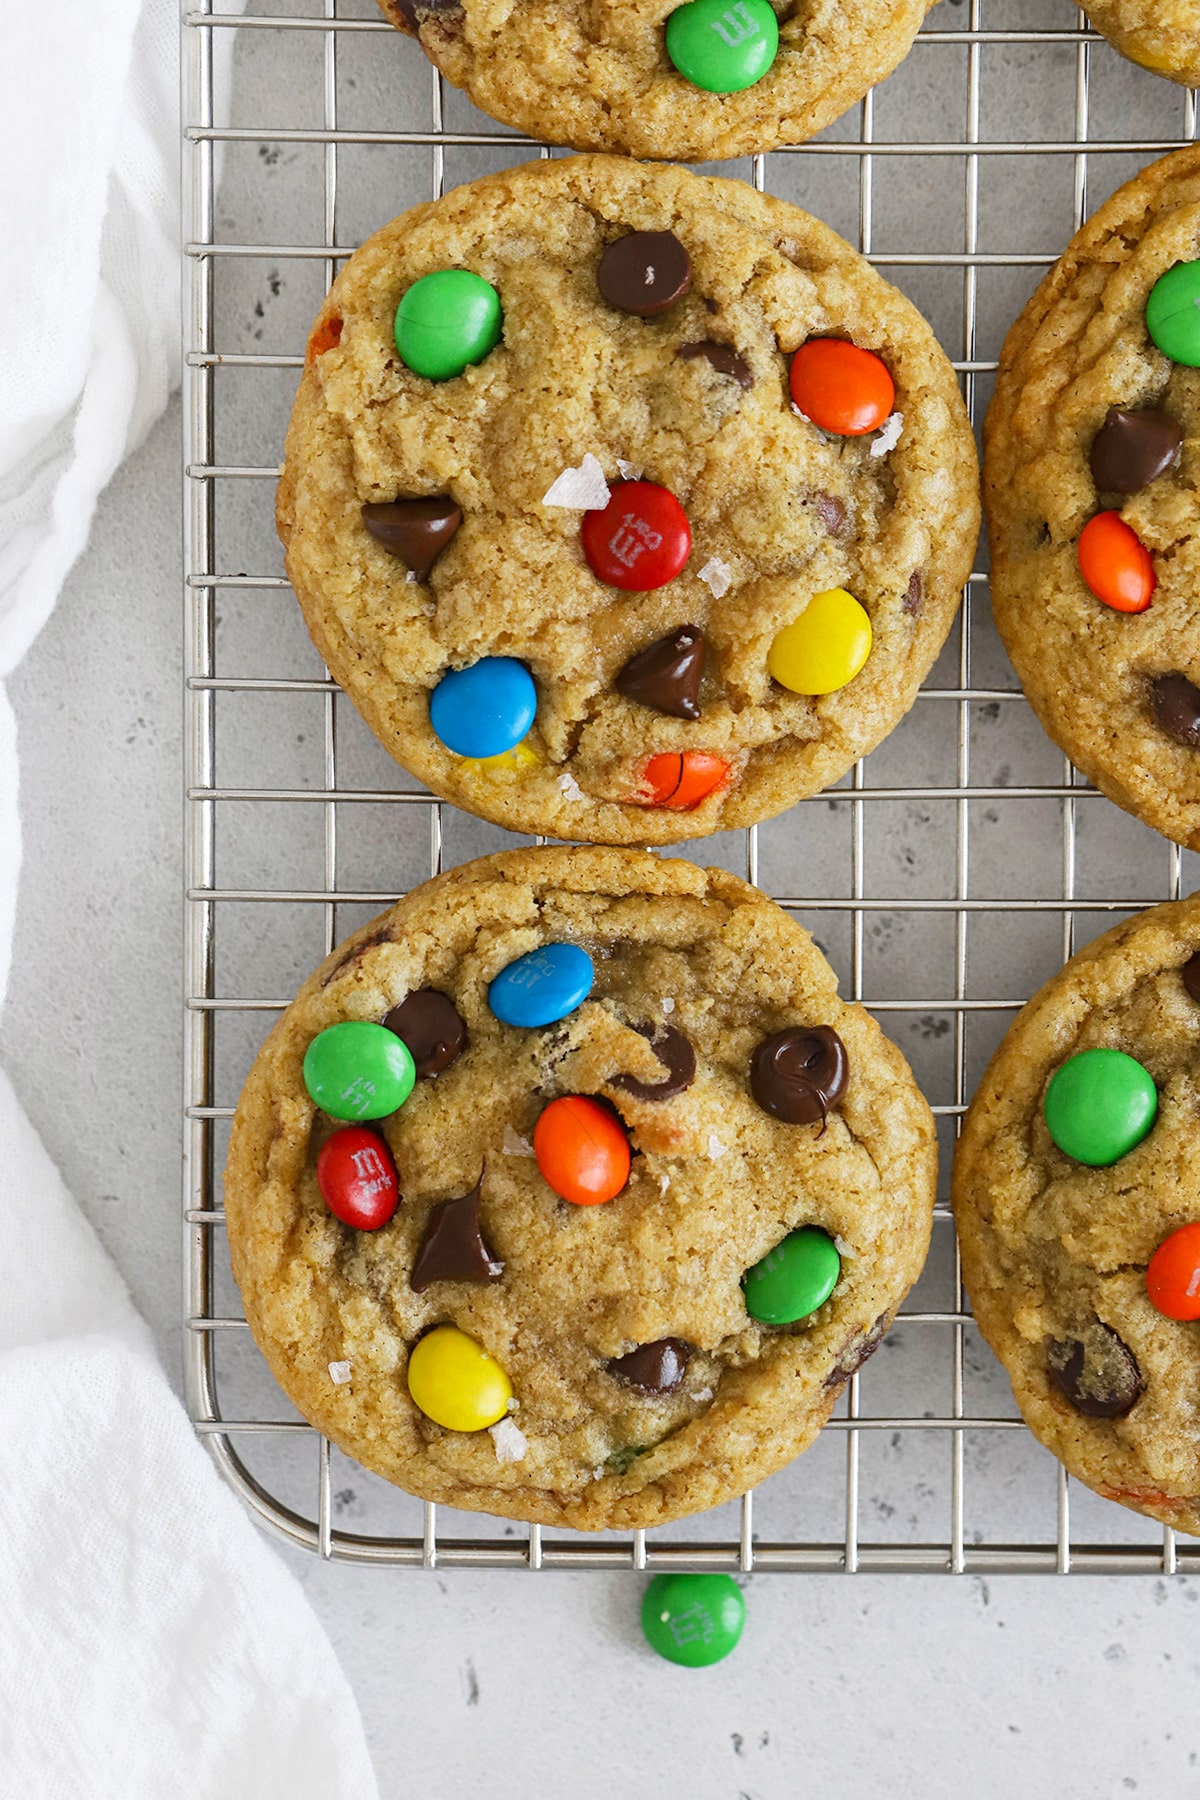 Overhead view of soft, chewy gluten-free m&m cookies cooling on a wire rack